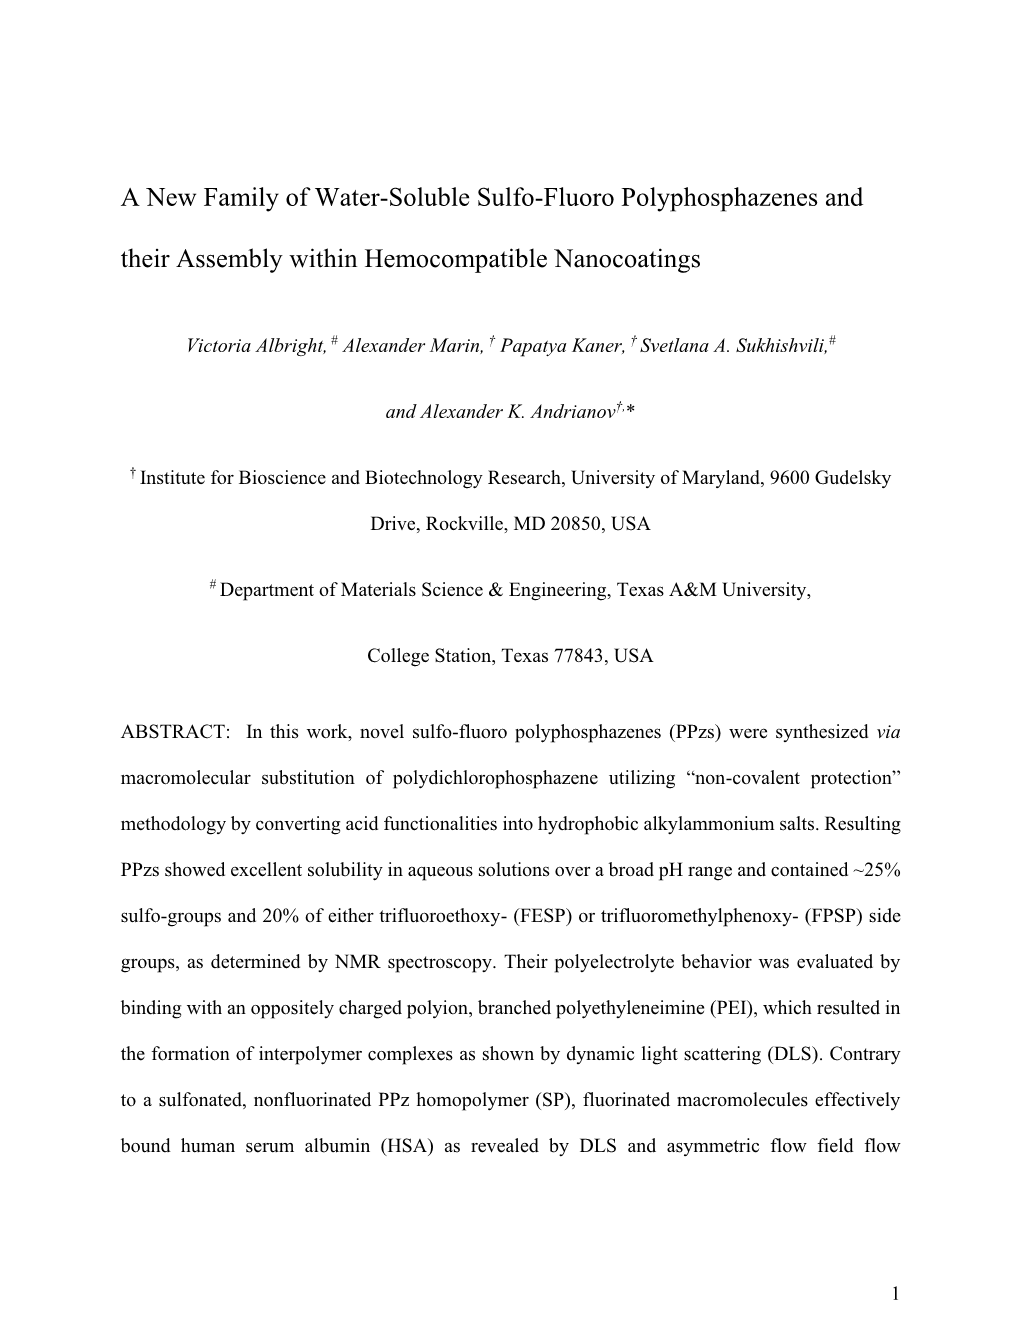 New Family of Water-Soluble Sulfoâ€“Fluoro Polyphosphazenes And